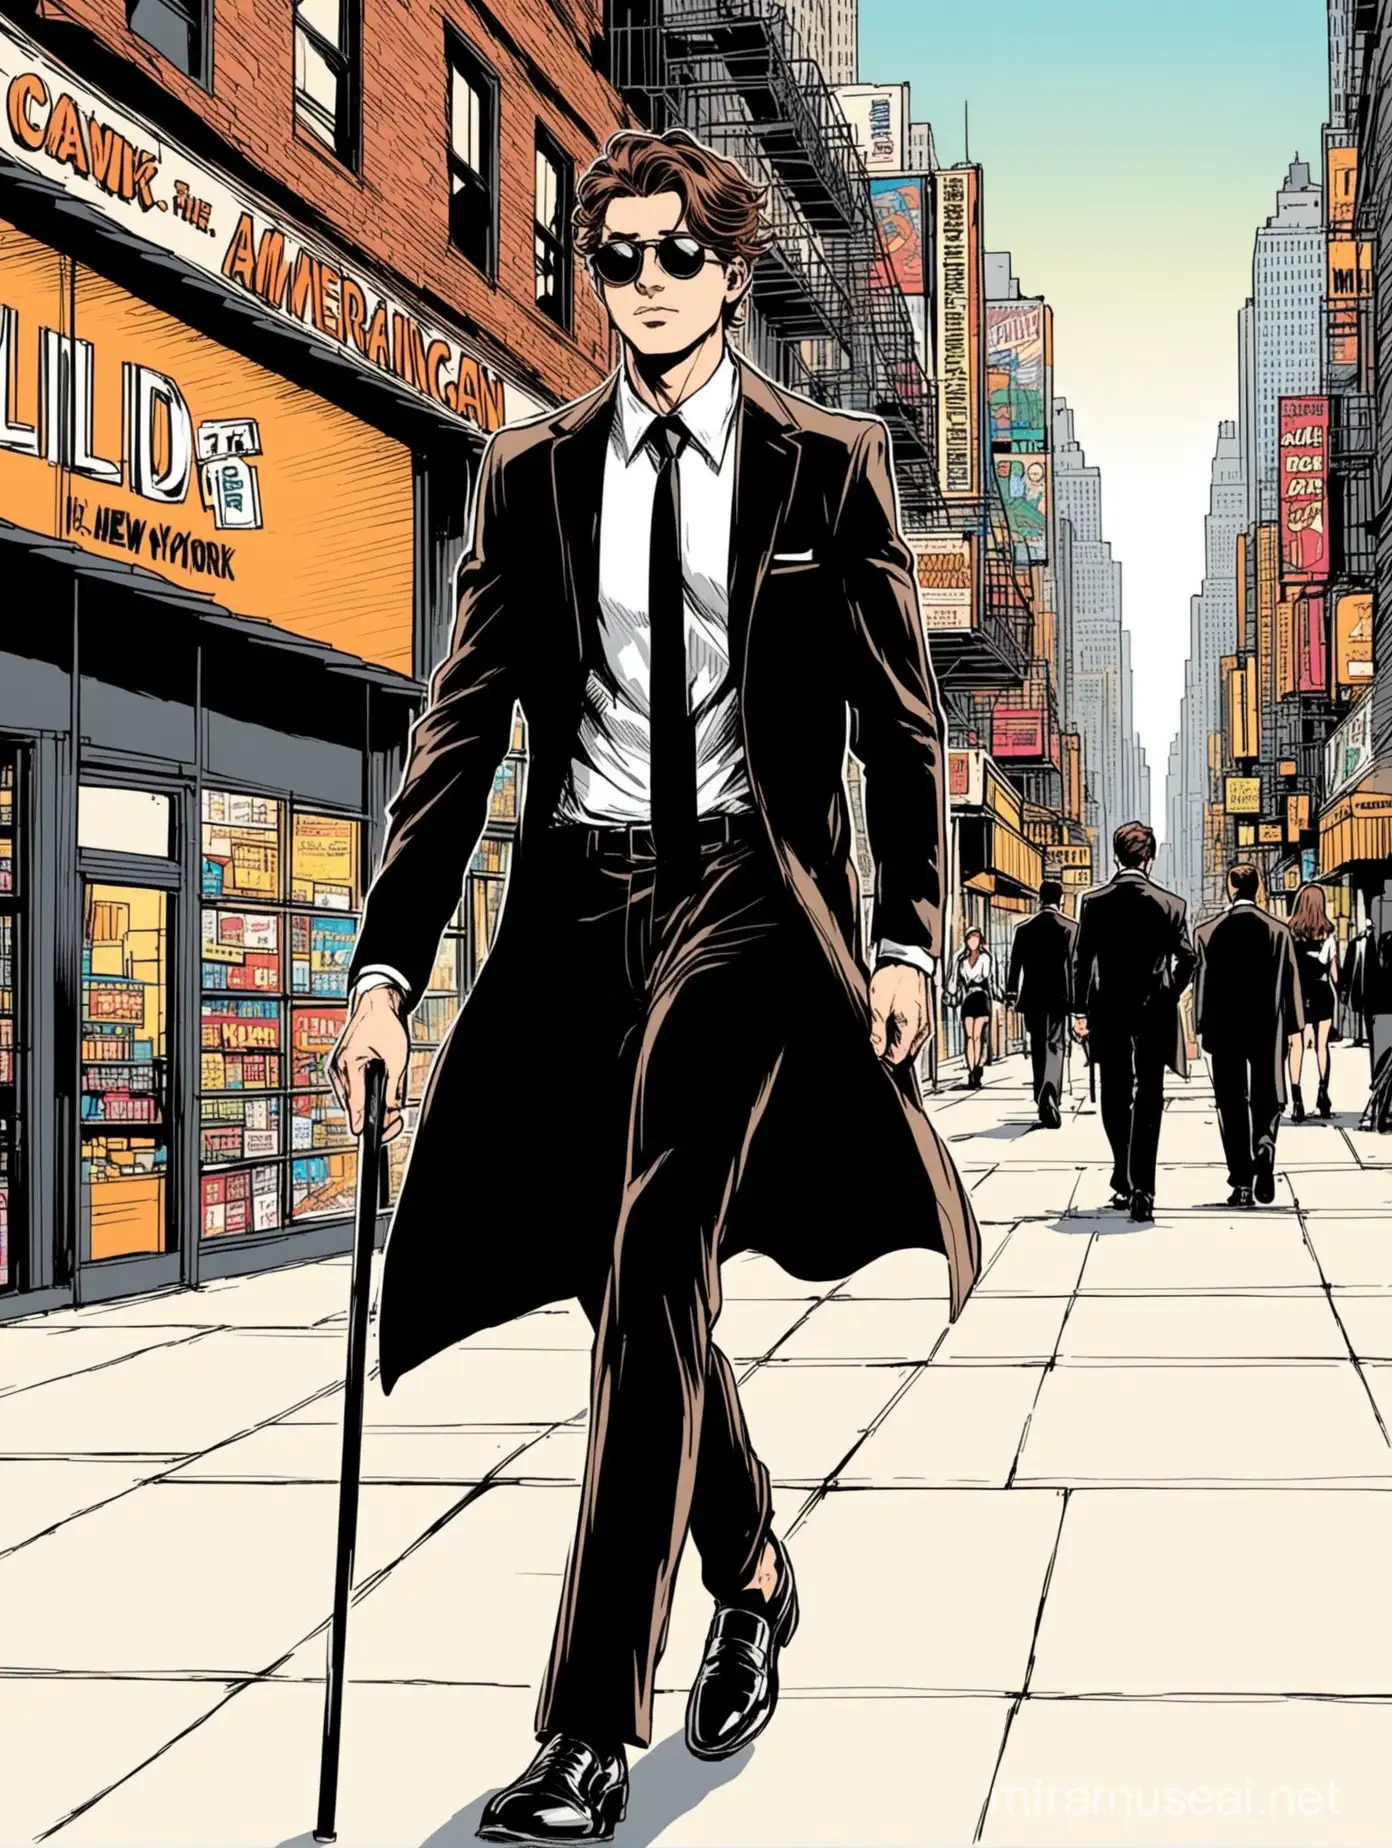 Drawing by American comic books style: A handsome American young man with brown hair, wearing black round sunglasses, wearing a white shirt, black tie, black jacket, black pants, and black shoes. He carries a blind cane and walks in the streets of New York, with the windows of shops selling clothes and the sounds of billboards in the background.